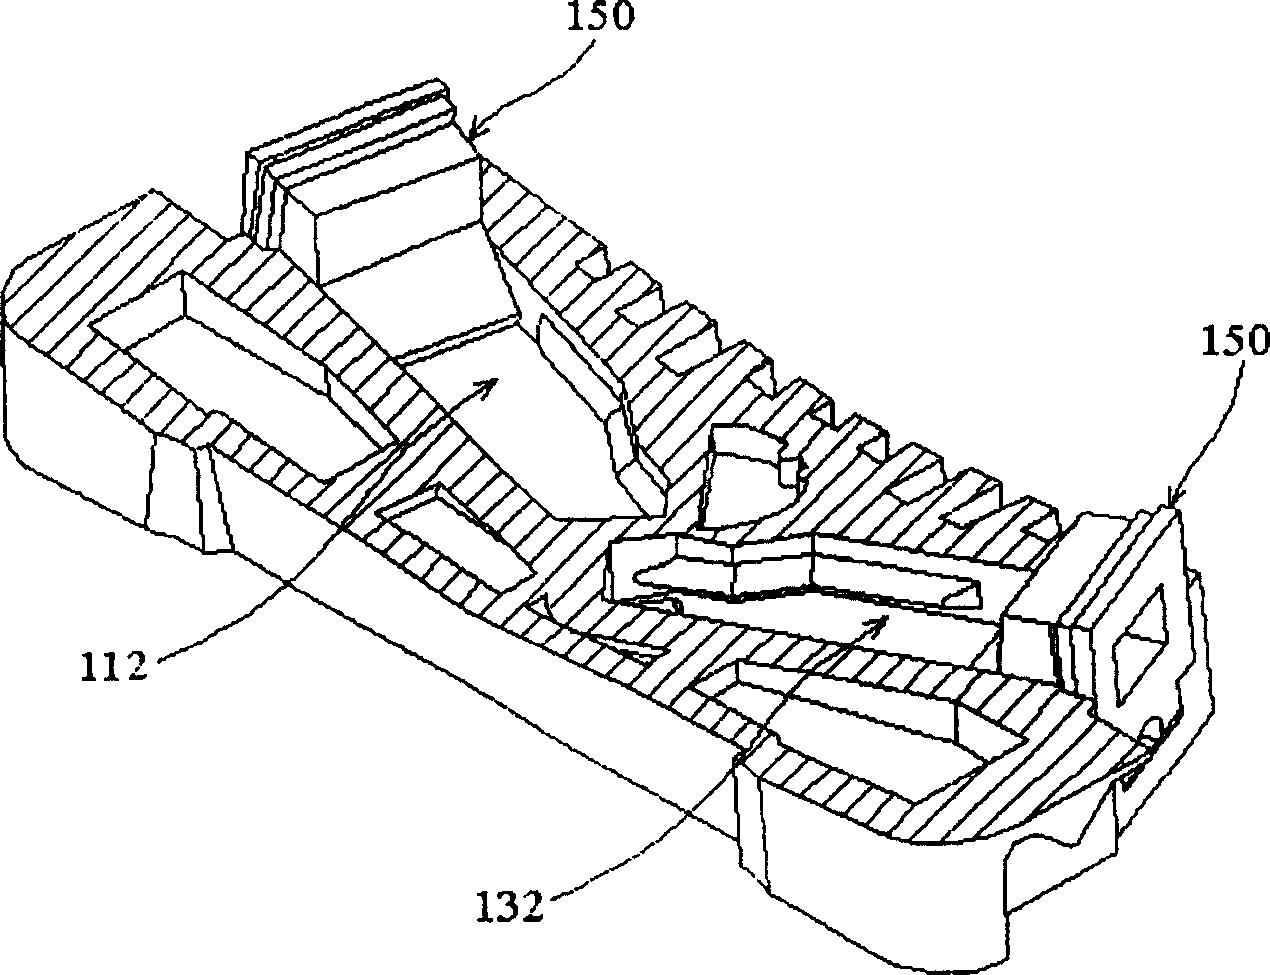 Ink box and body structure of ink box possessing multiple compartments